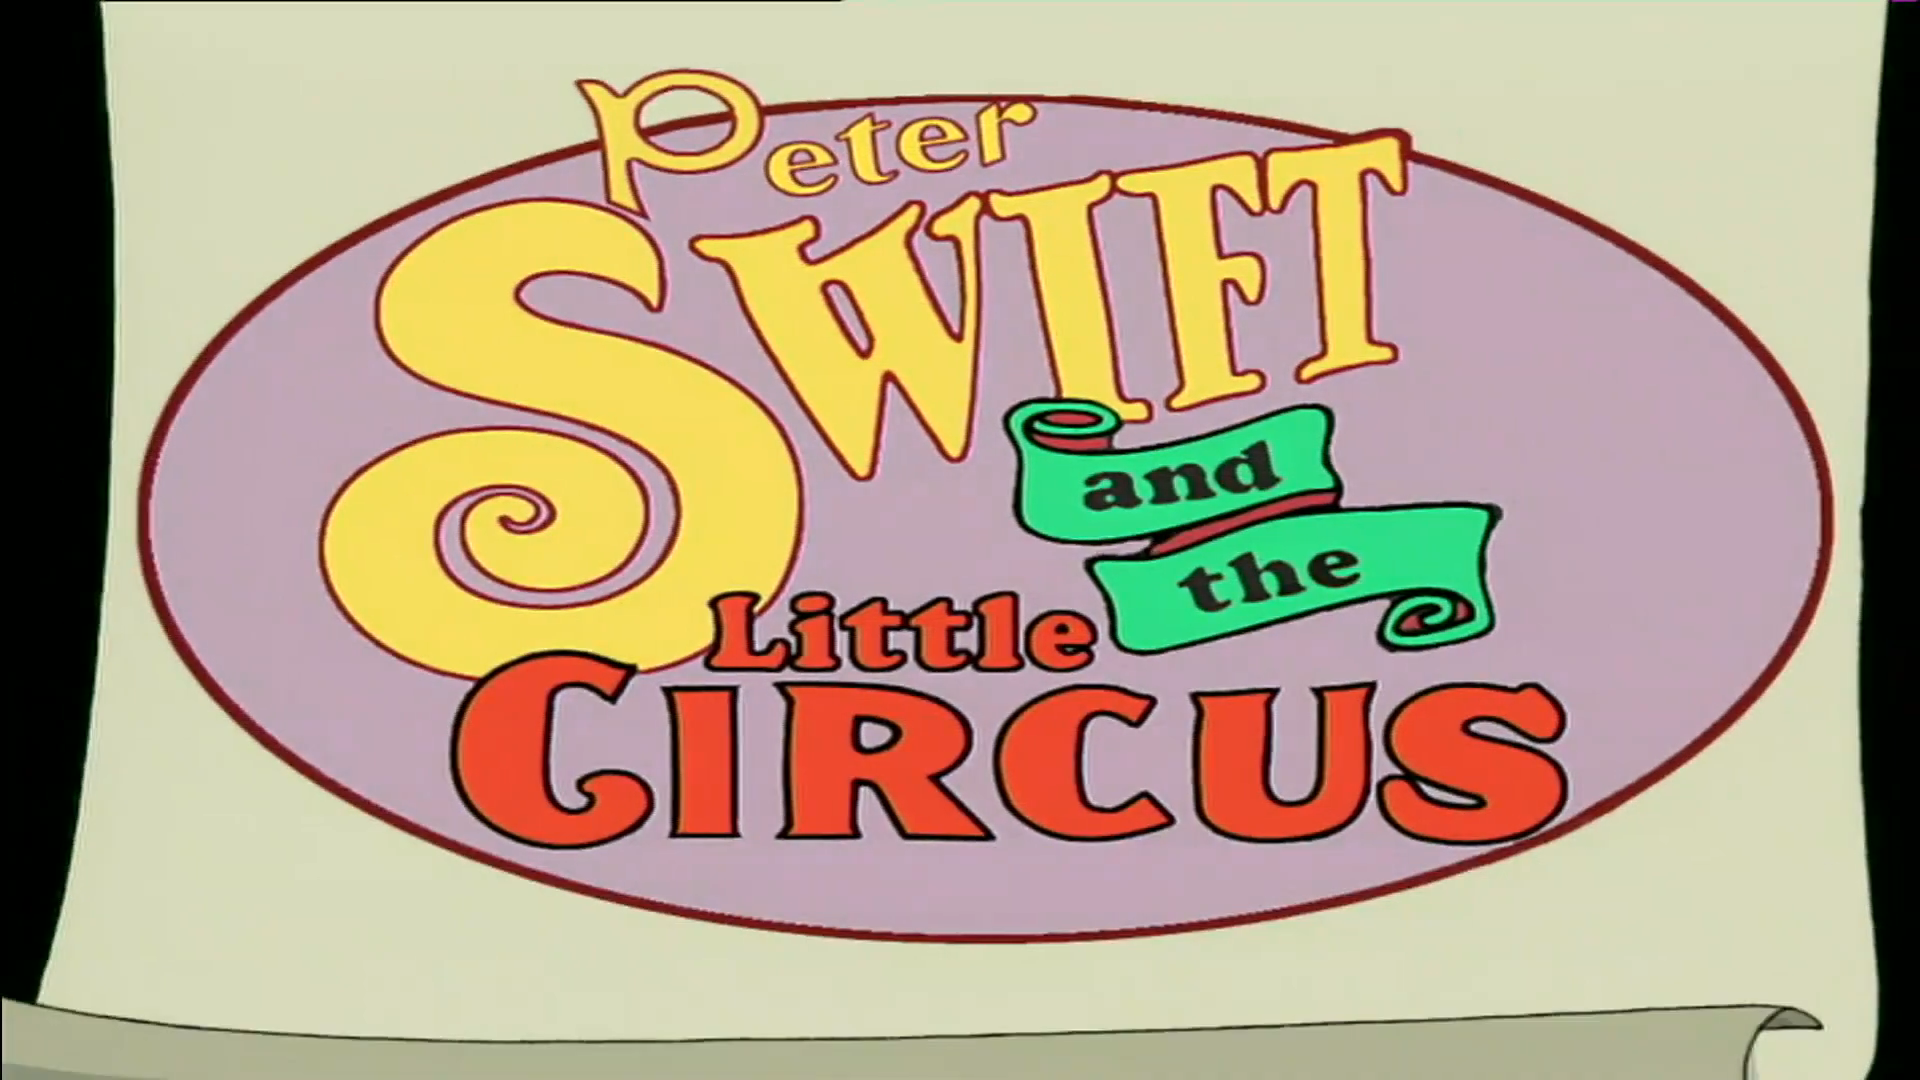 Peter Swift and the Little Circus Episode 9 - Peter Swift and the Little Circus (partially found English dub of "Peter Swift et le Petit Cirque" animated series; 2004)